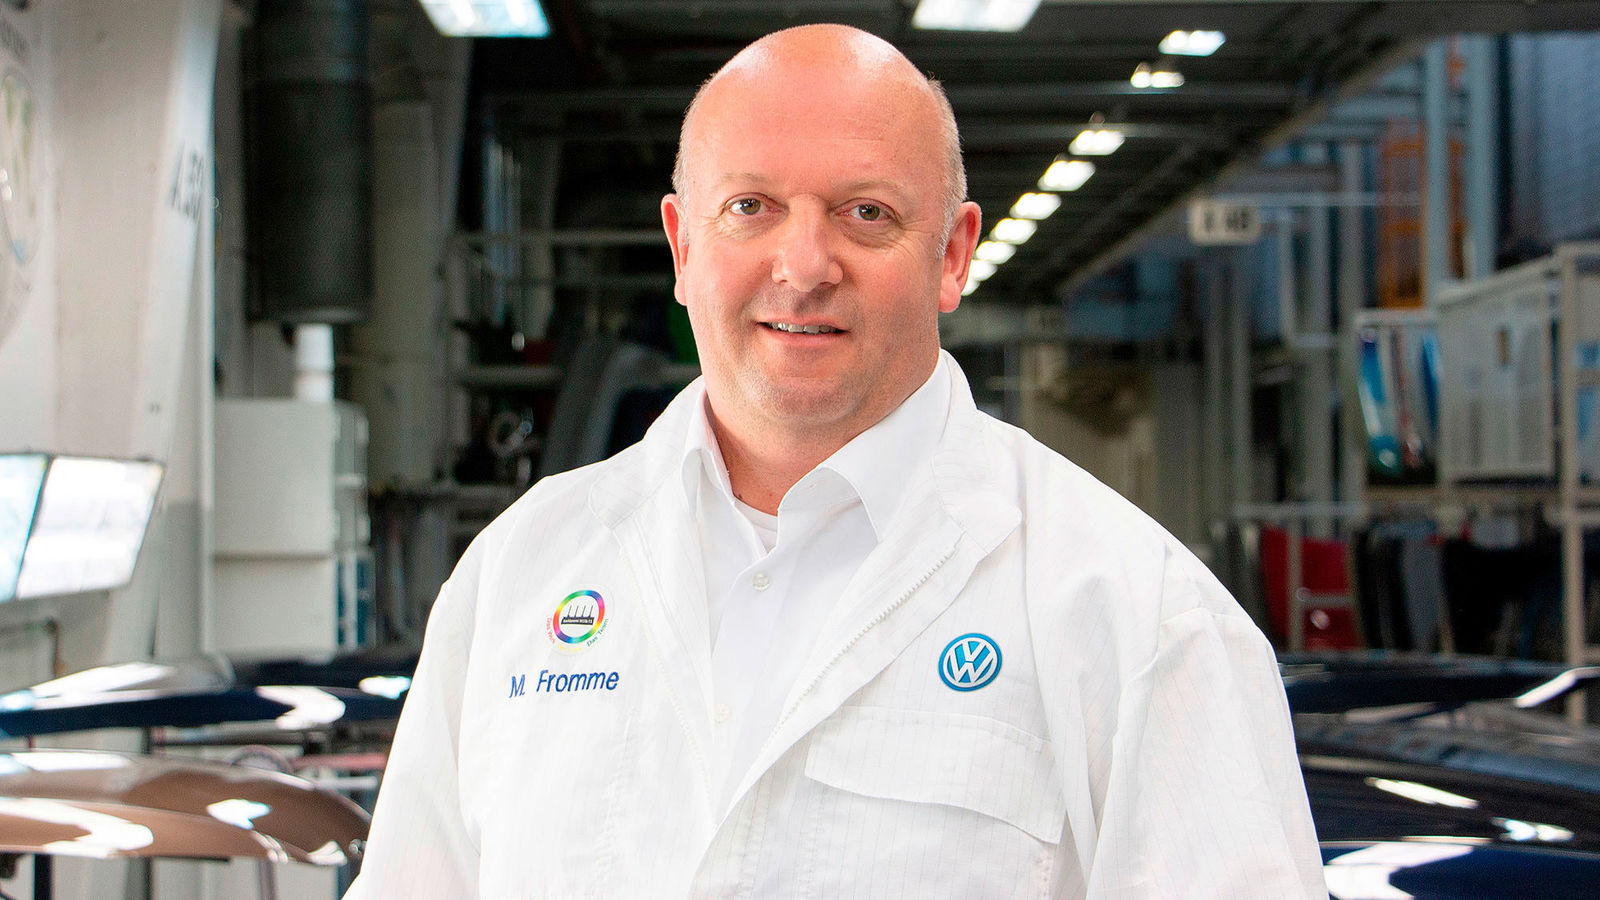 Story: "Start of the Variant: Wolfsburg plant builds the complete Golf family"